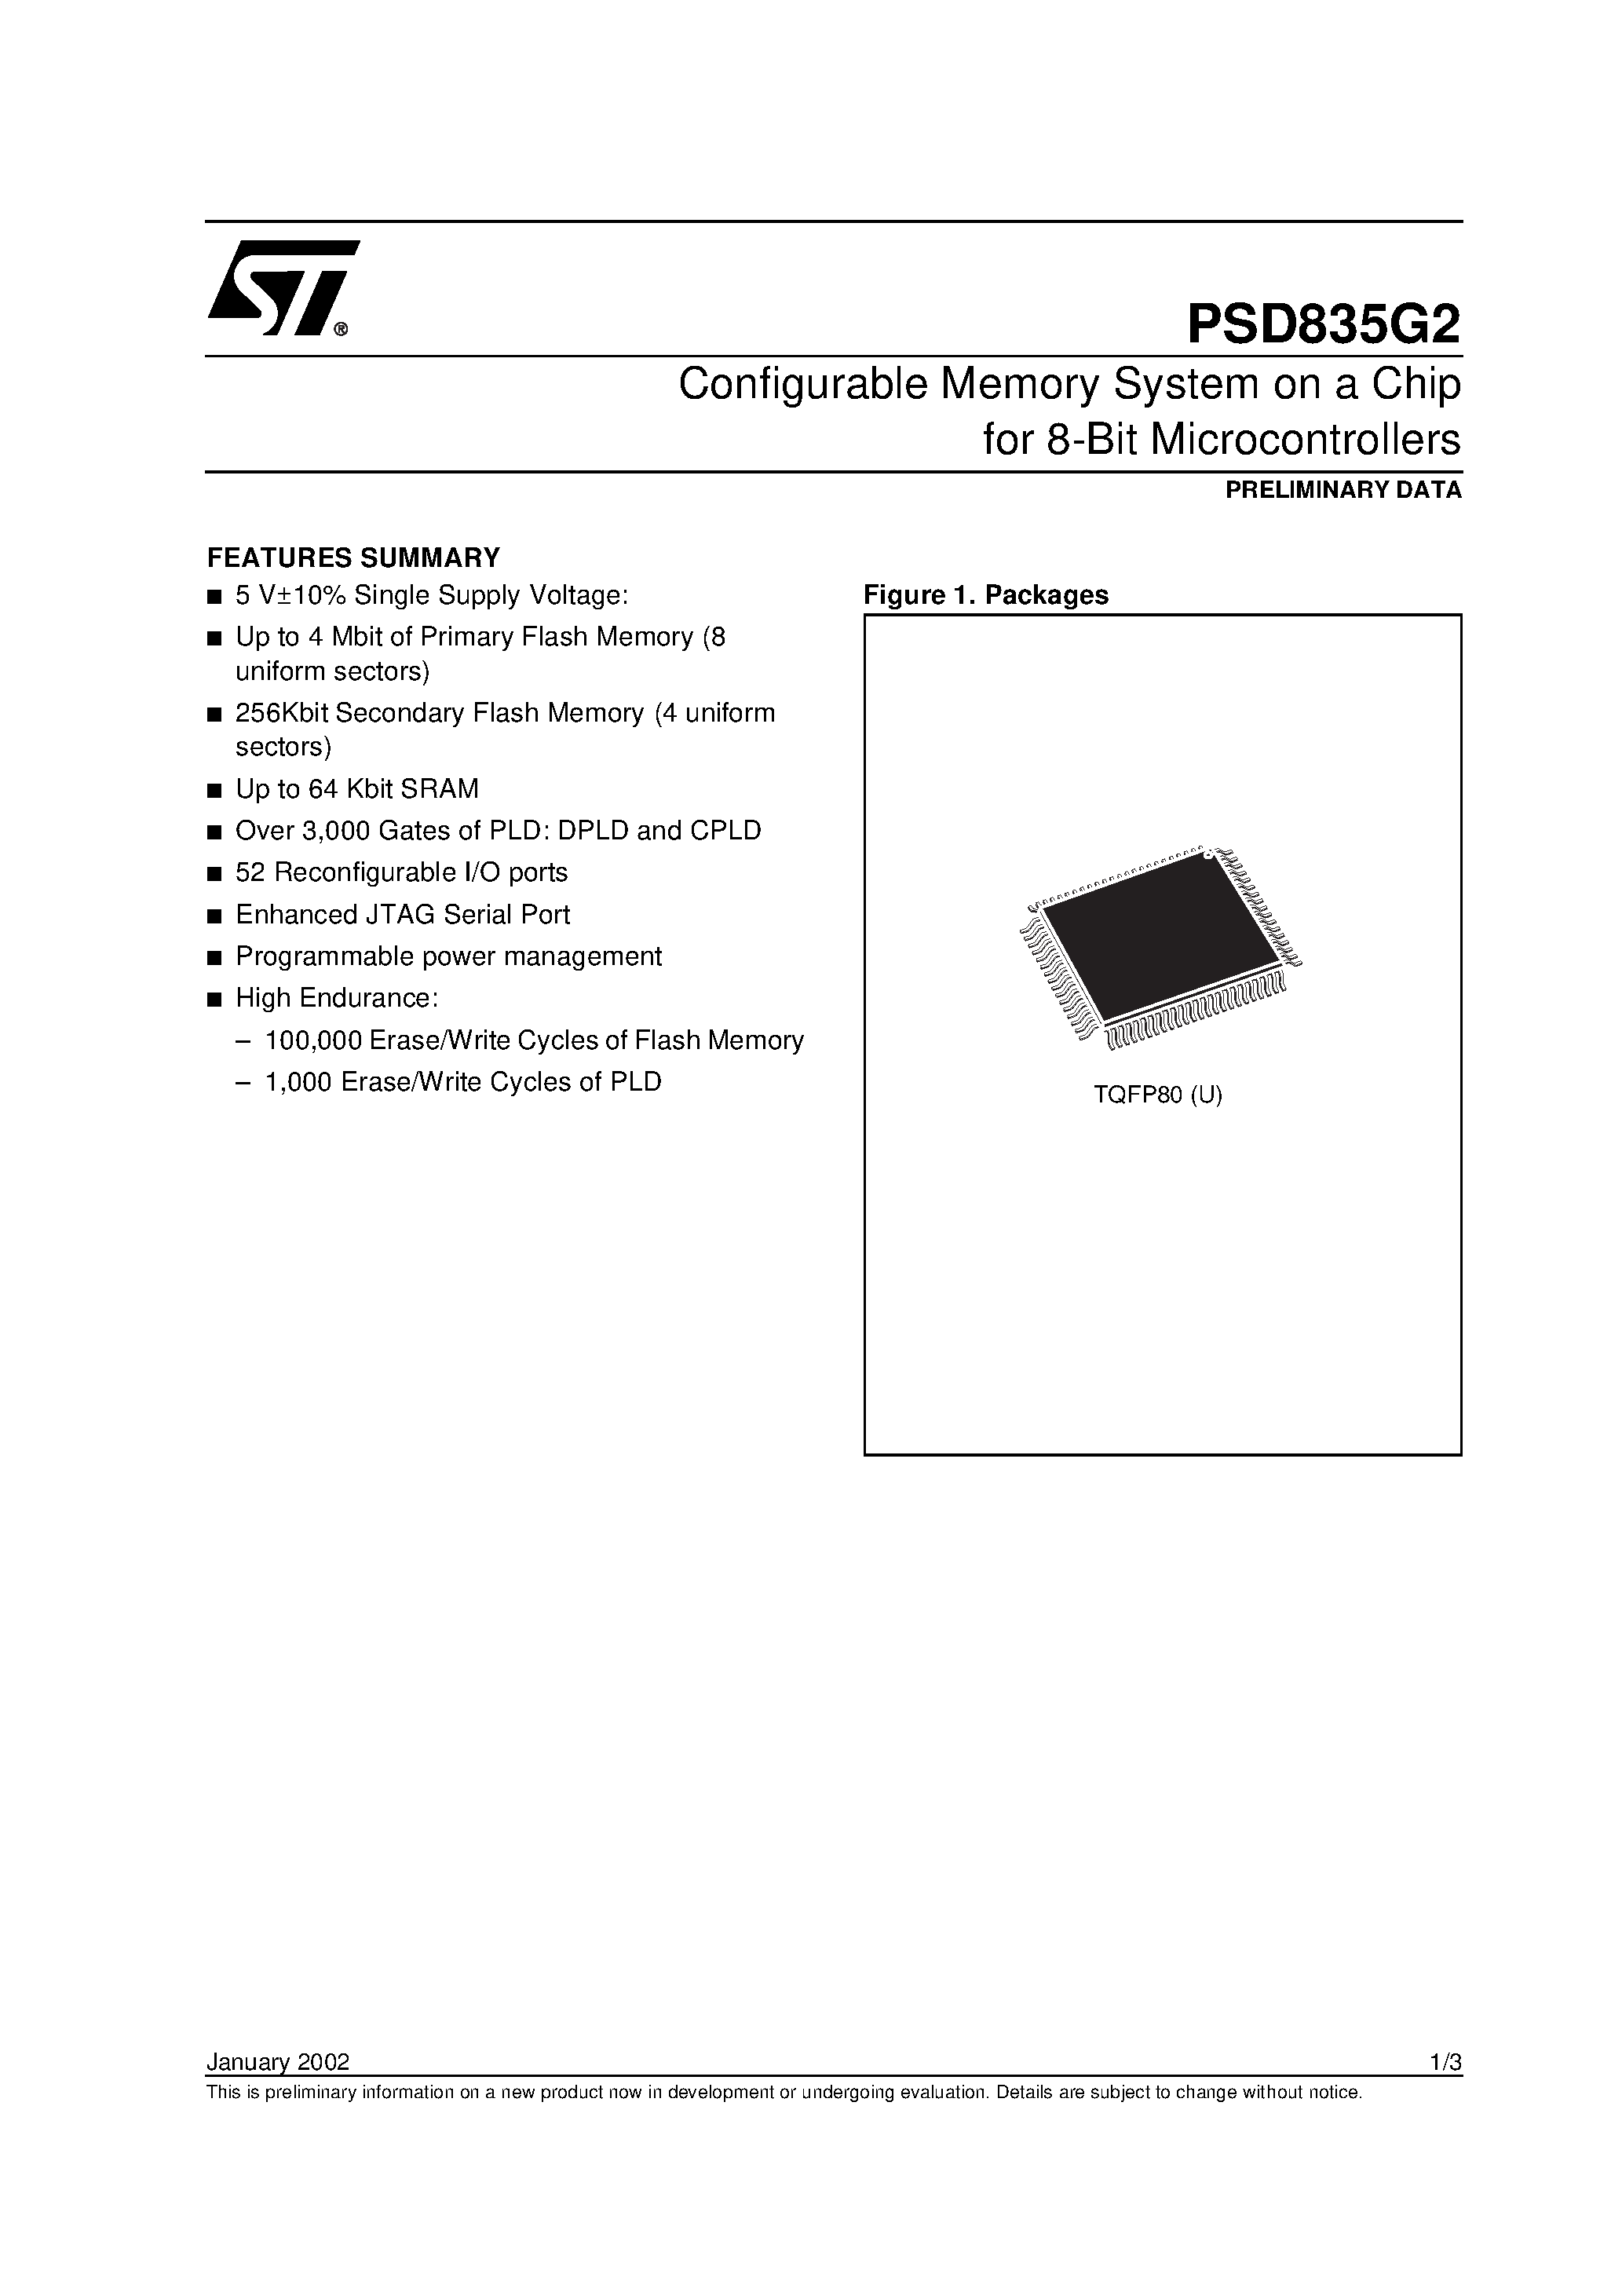 Datasheet PSD835F2-A-15U - Configurable Memory System on a Chip for 8-Bit Microcontrollers page 1